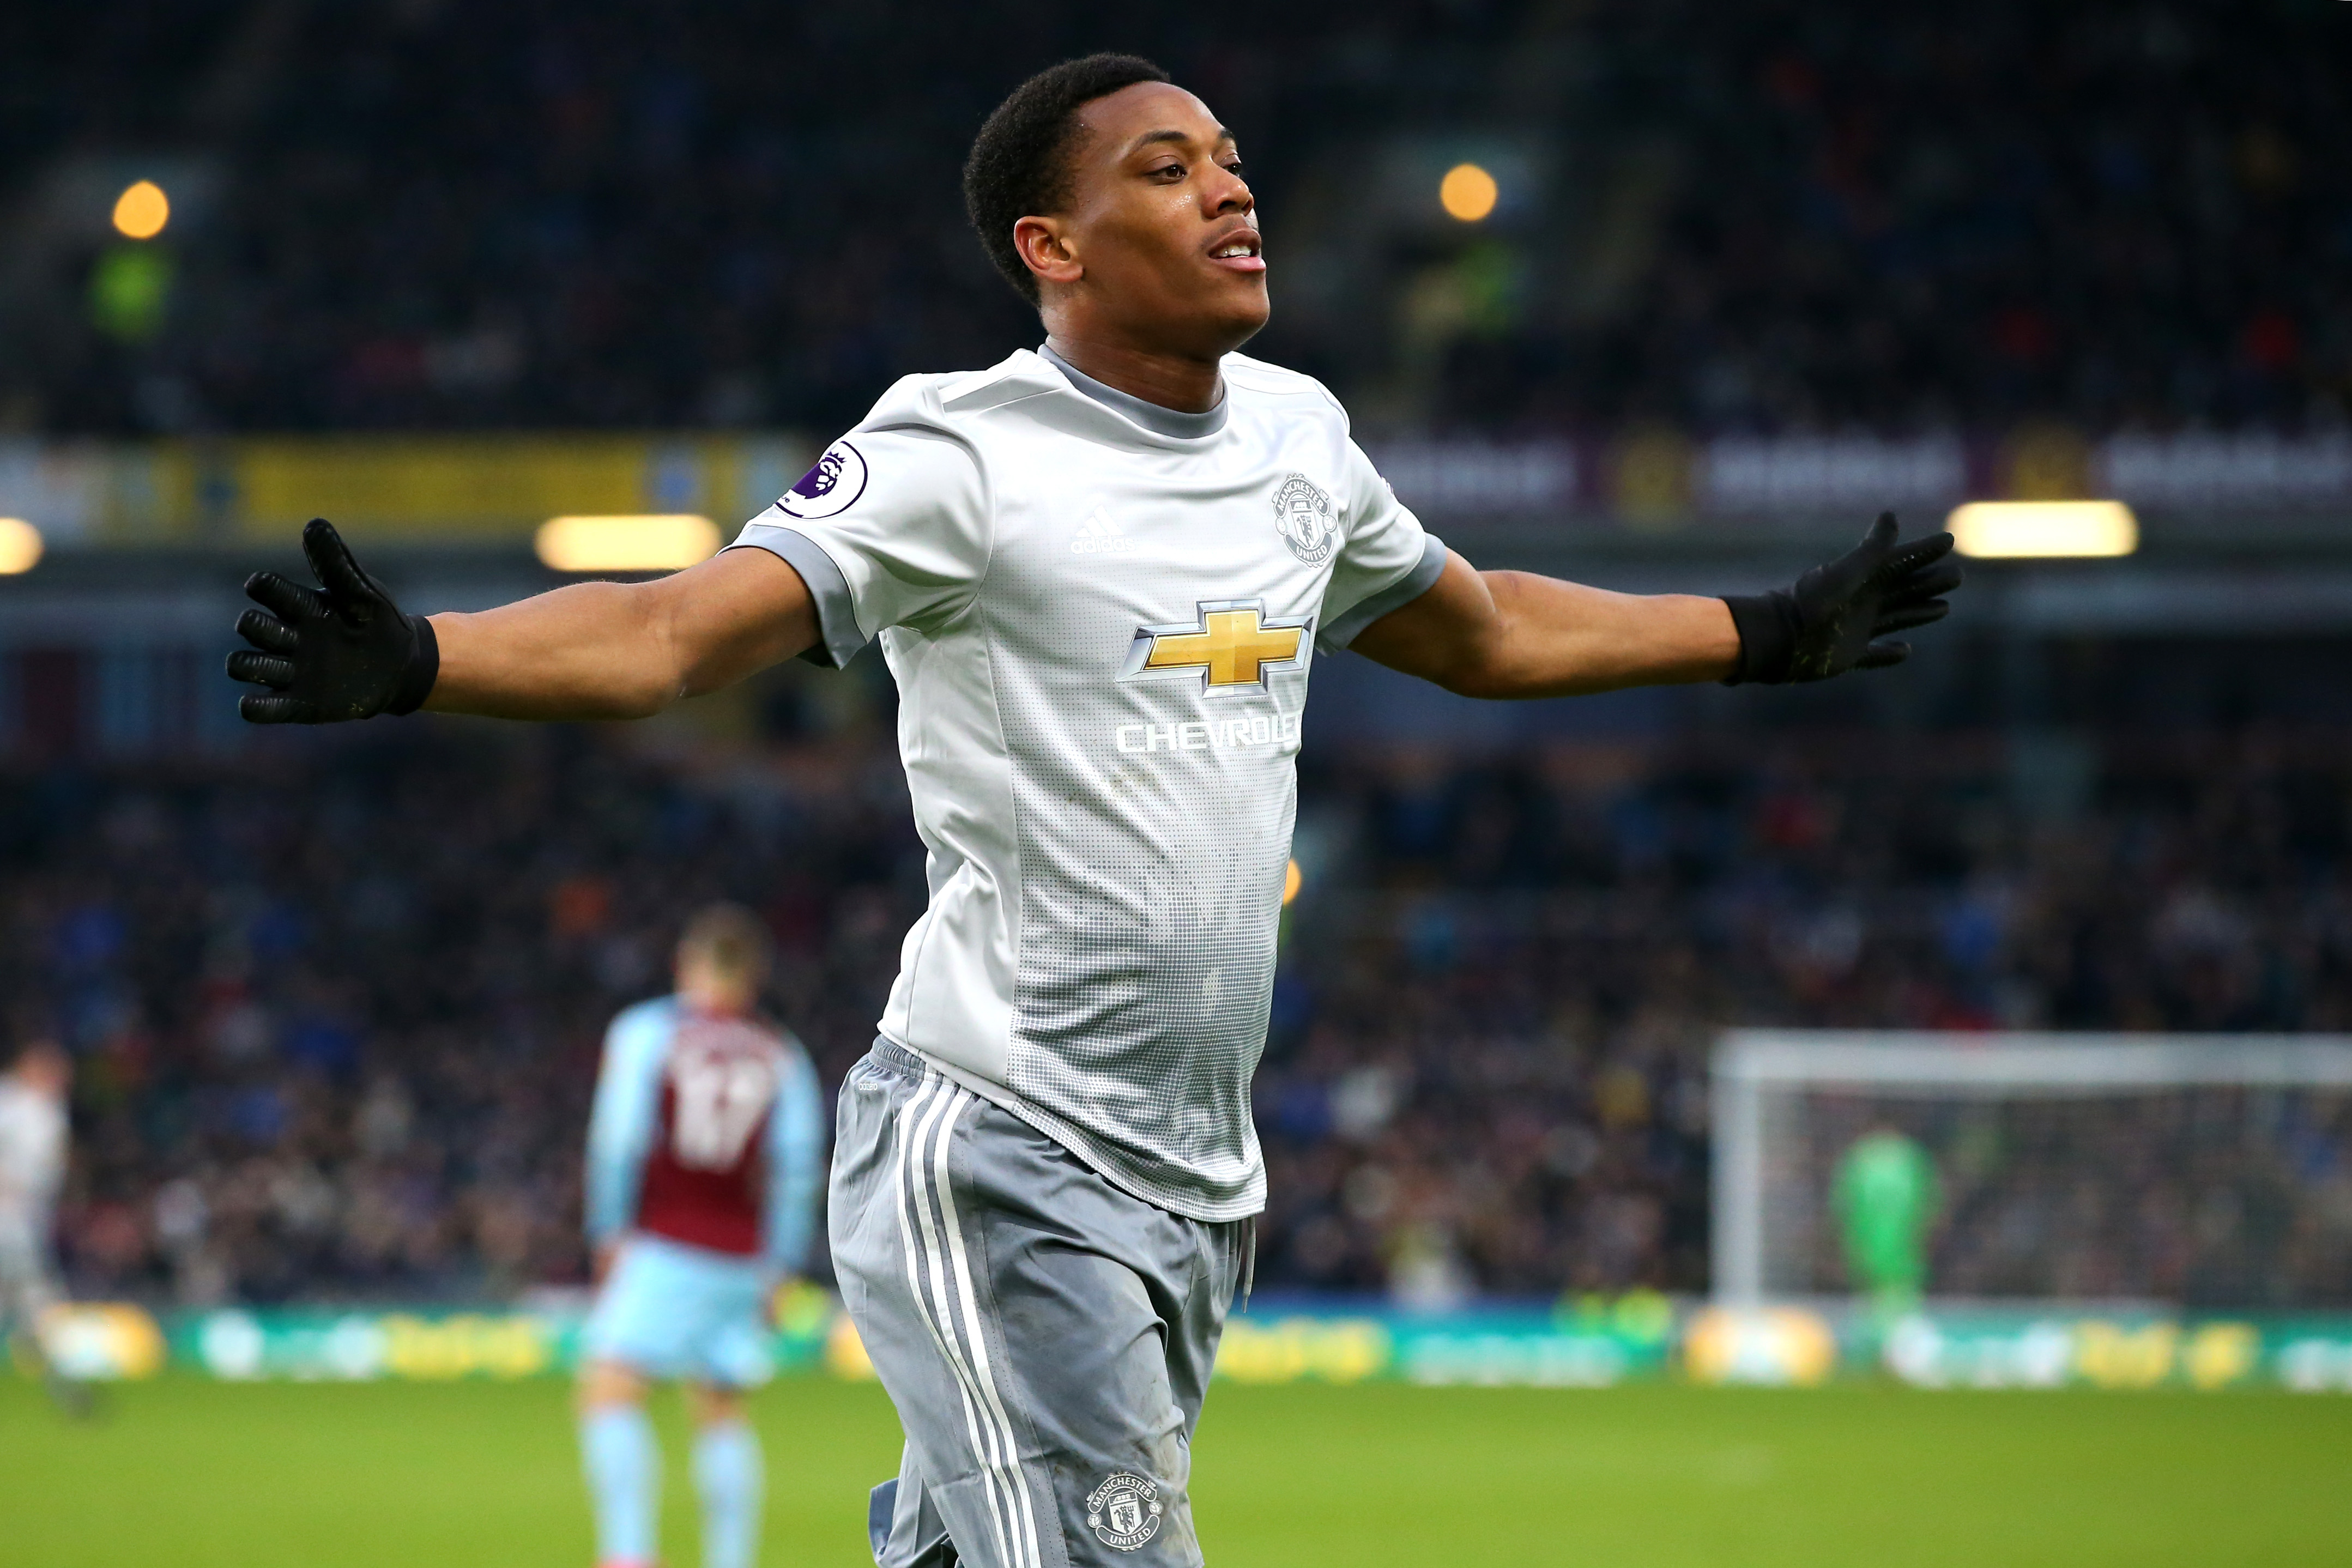 BURNLEY, ENGLAND - JANUARY 20:  Anthony Martial of Manchester United celebrates after scoring his sides first goal during the Premier League match between Burnley and Manchester United at Turf Moor on January 20, 2018 in Burnley, England.  (Photo by Alex Livesey/Getty Images)